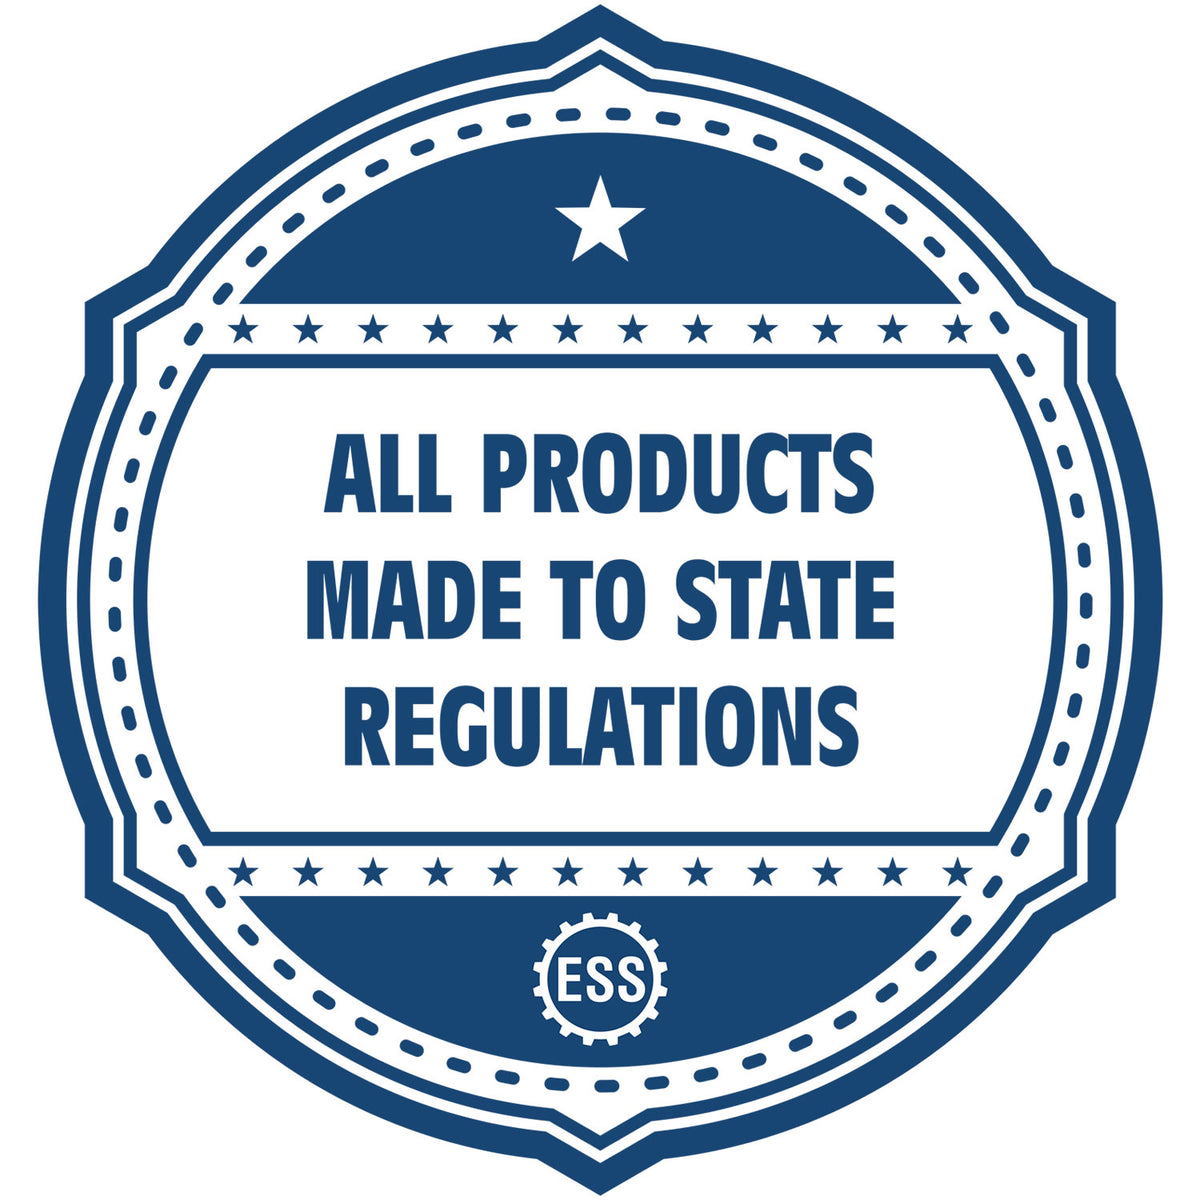 An icon or badge element for the Handheld Indiana Professional Engineer Embosser showing that this product is made in compliance with state regulations.